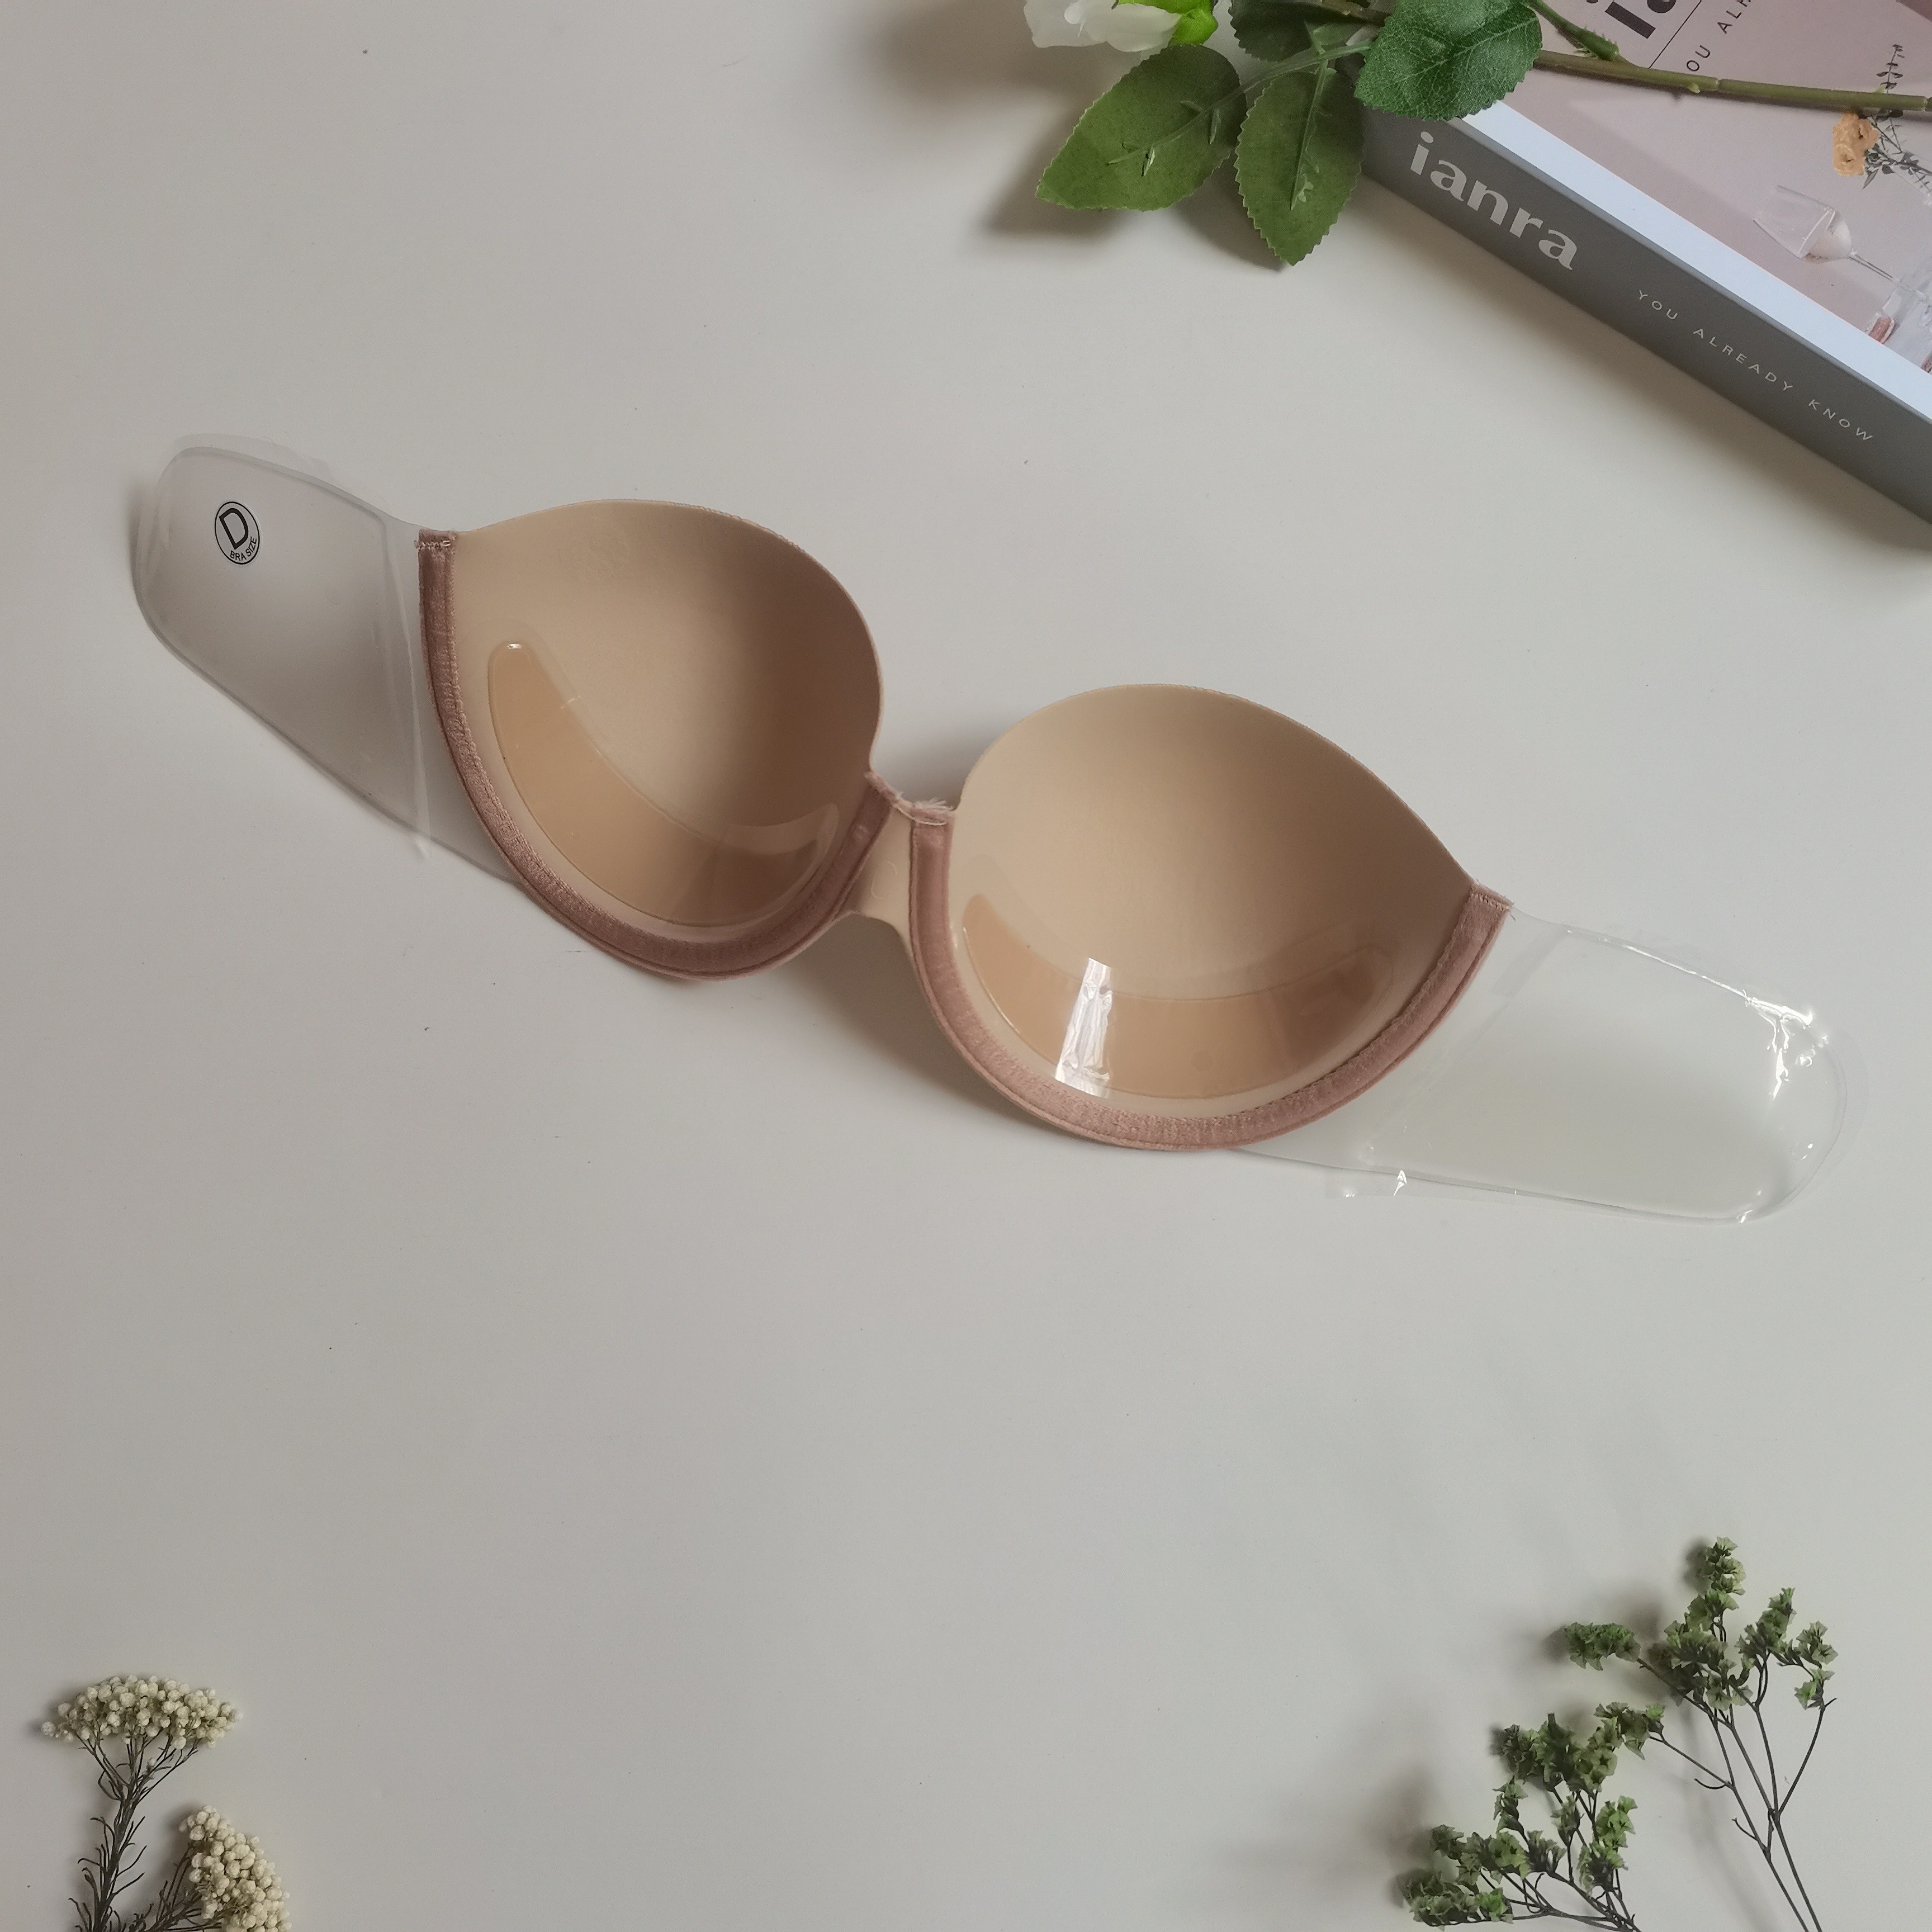 Invisible Stick-On Lift Bra, Strapless & Seamless Push Up Self